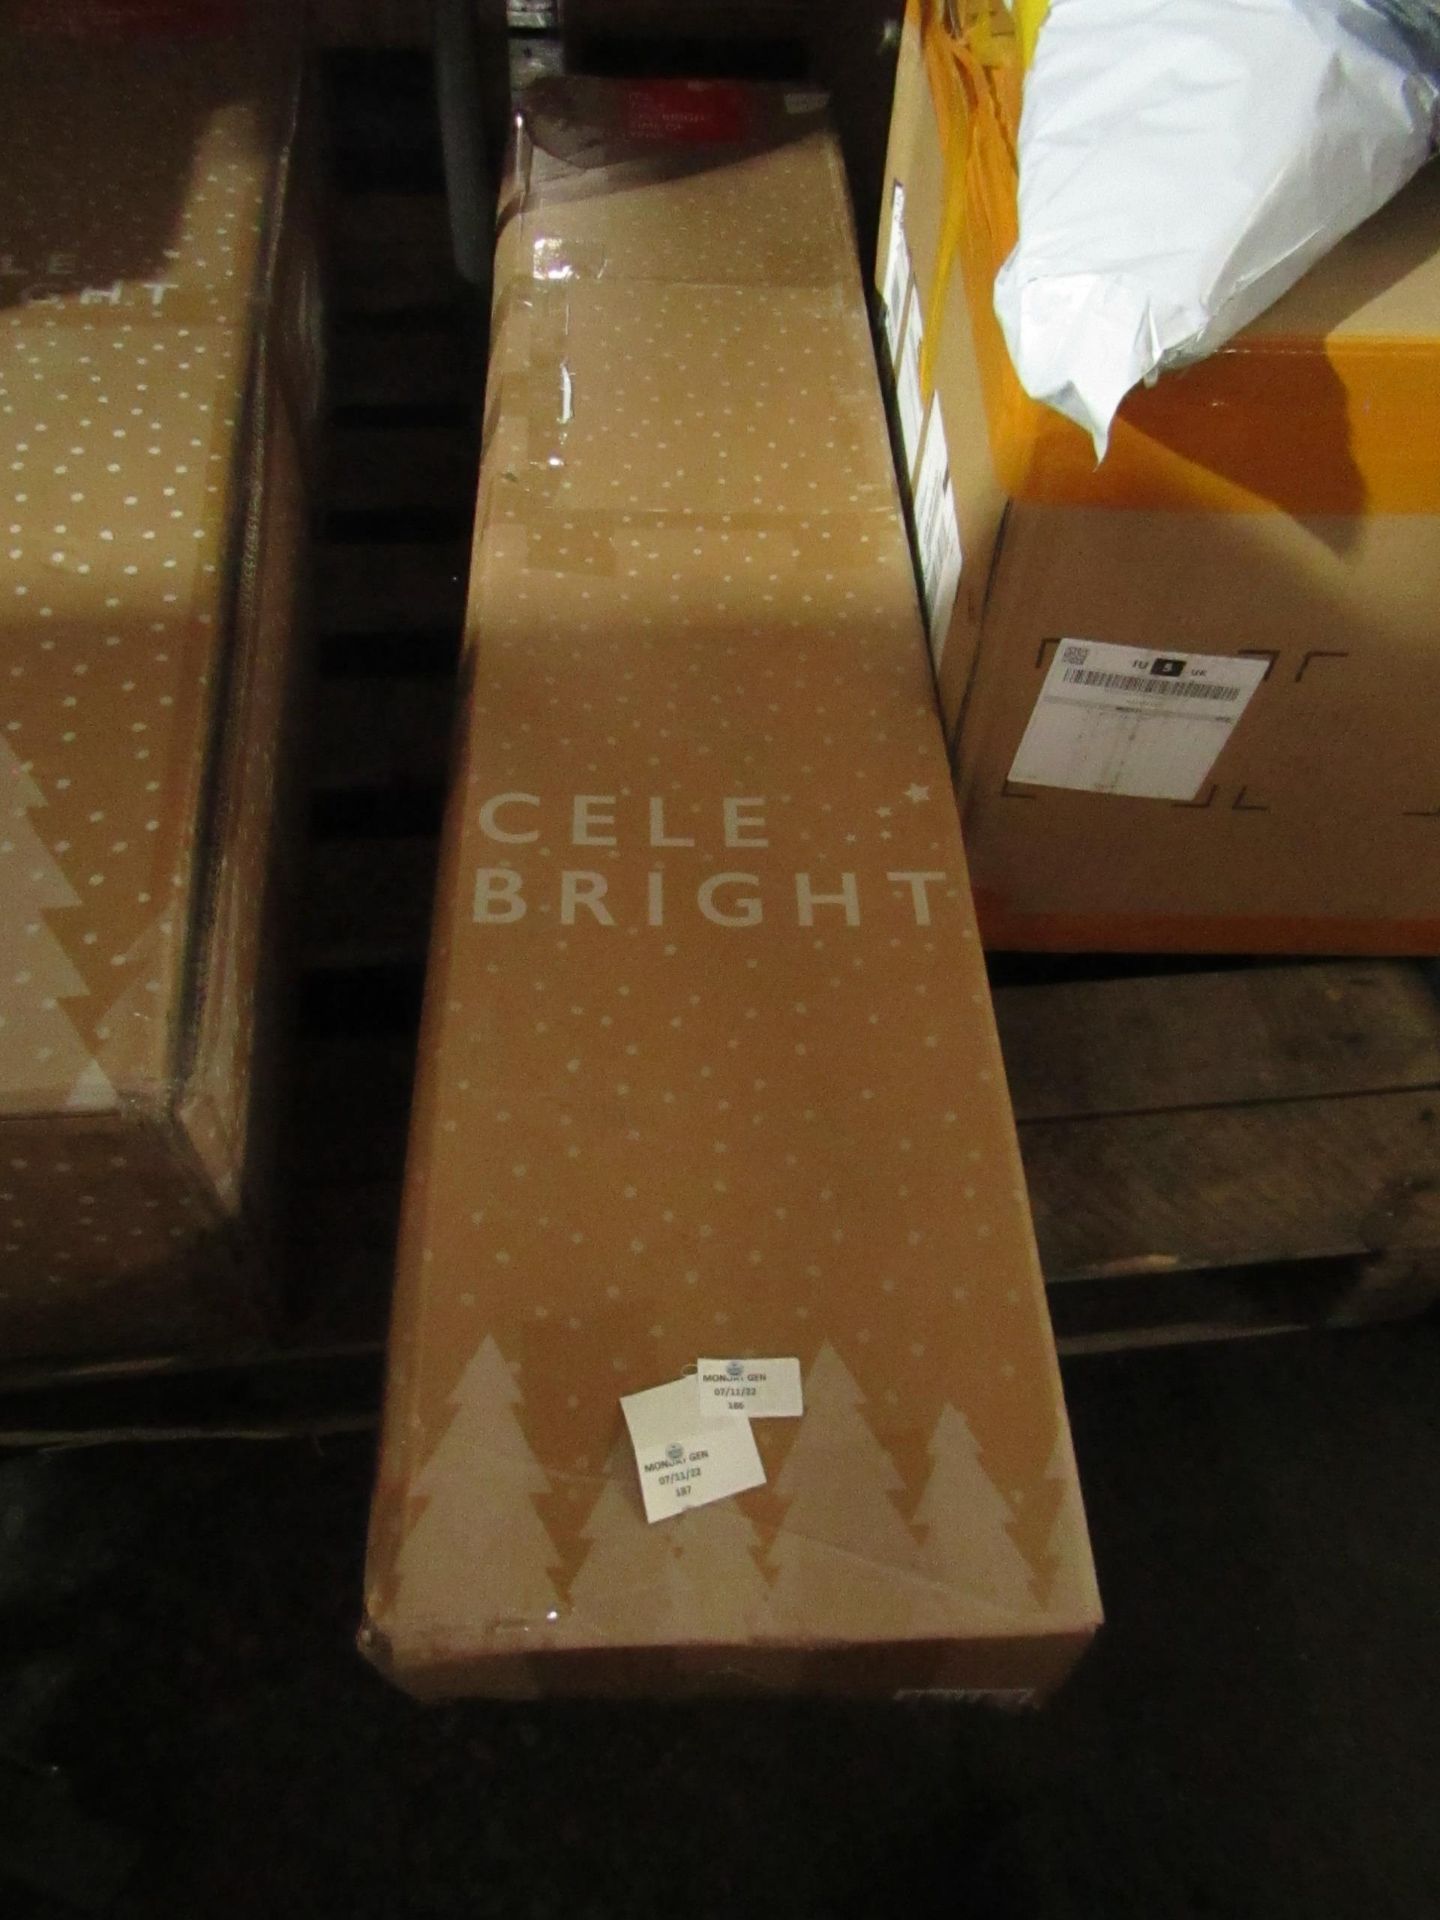 | 1X | CELEBRIGHT SNOWY BROWN TWIG TREE 6FT WARM WHITE | USED CONDITION UNCHECKED & BOXED | NO